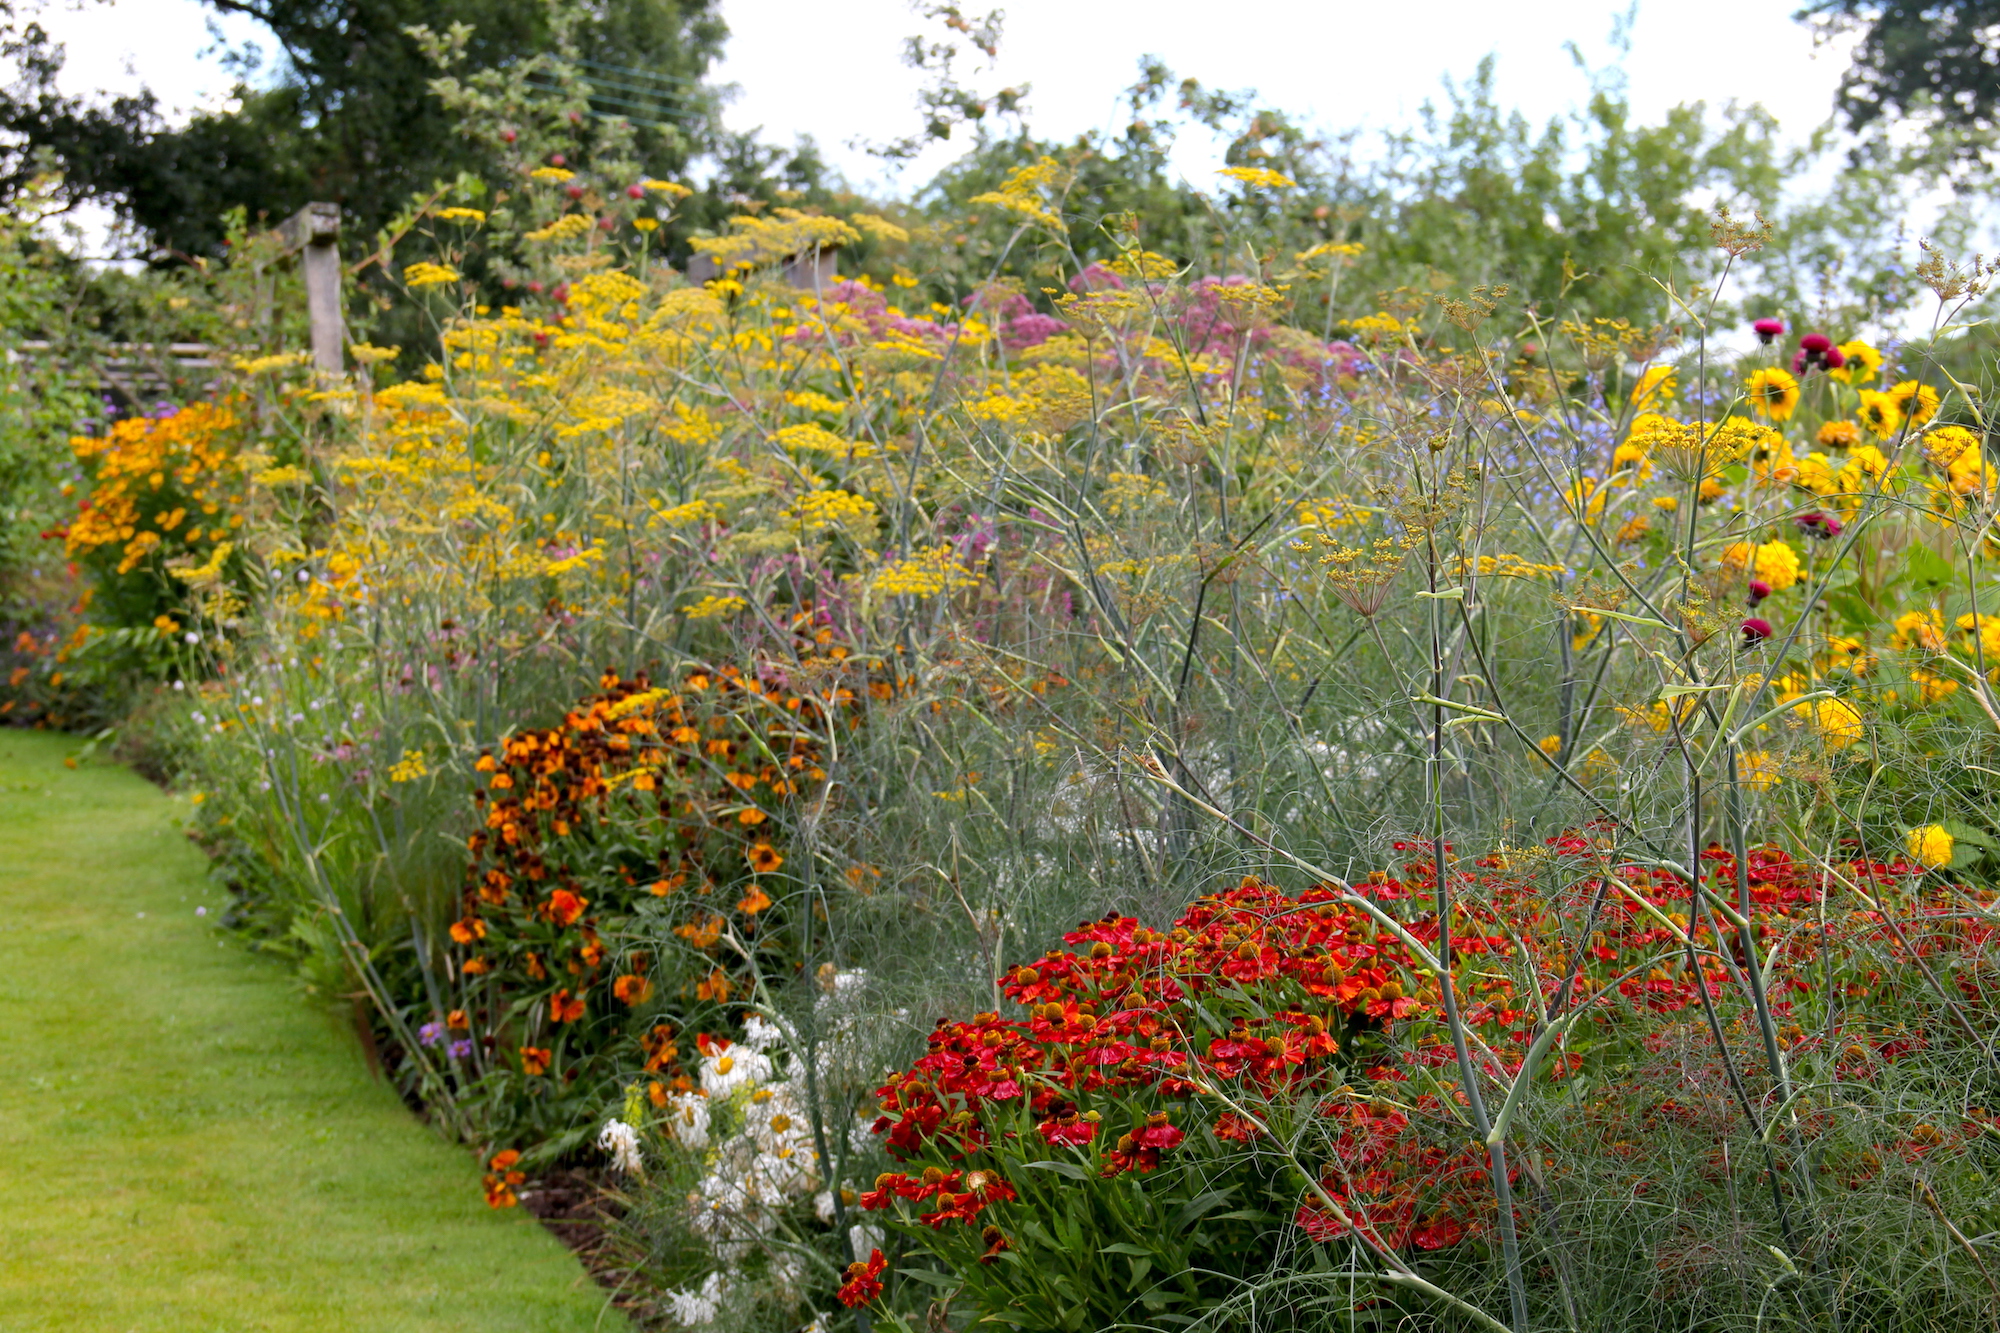 Late Summer Border at Leydens Garden. Built and maintained by gardeners in Kent at Roger Platts Garden Design and Nurseries